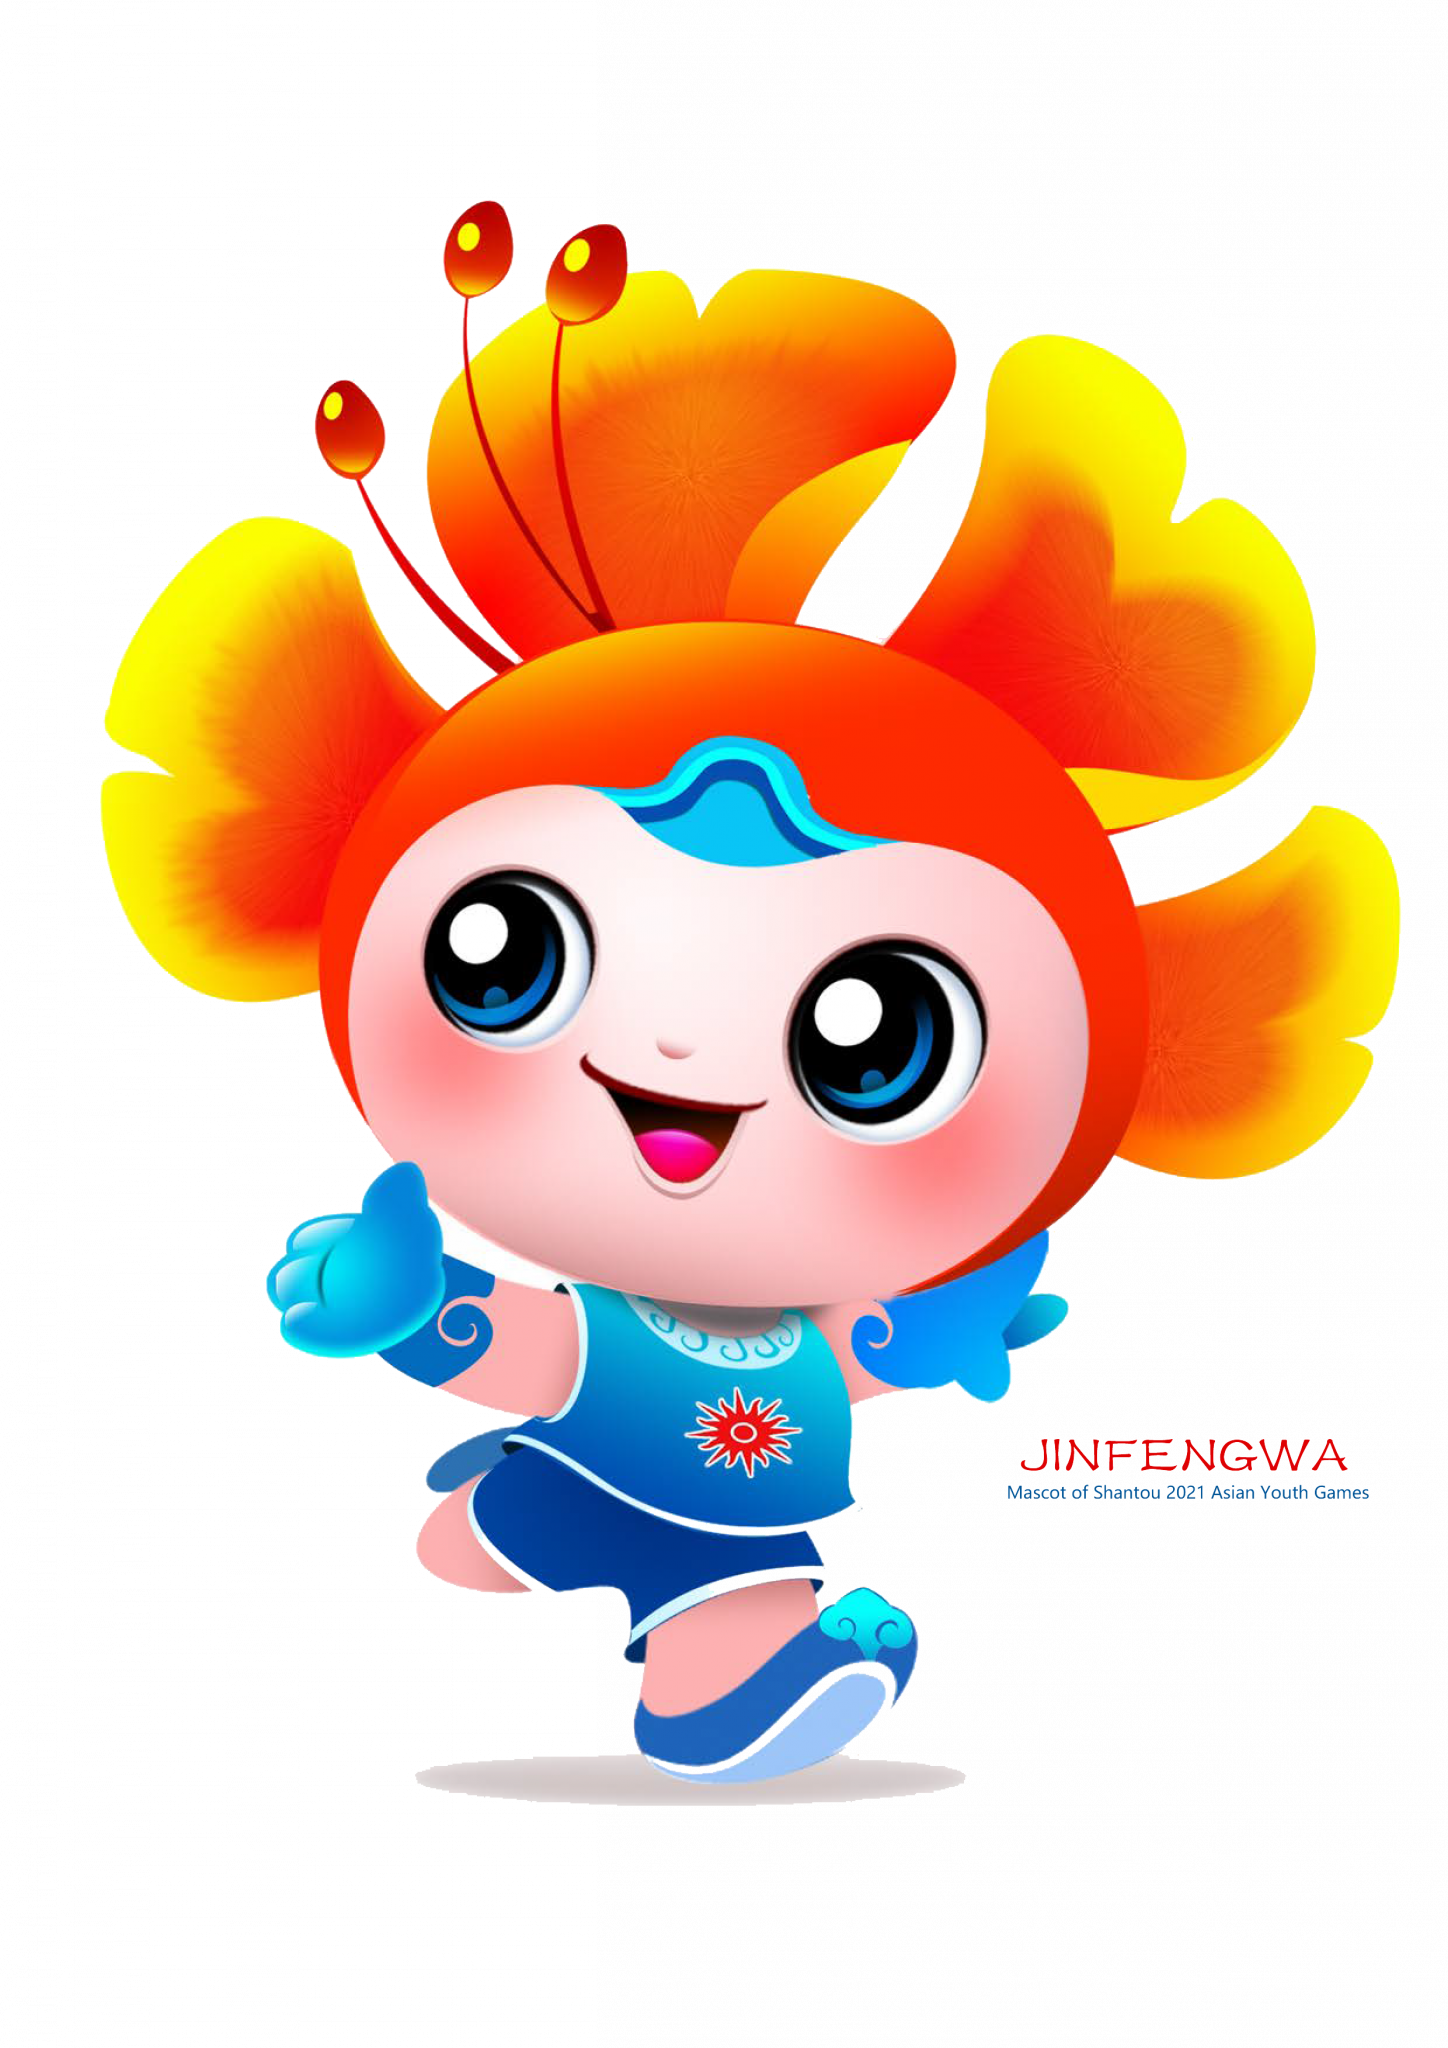 The launch of Shantou 2021 mascot Jinfengwa featured in Asian Youth Games organisers' latest report to the Olympic Council of Asia ©Shantou 2021